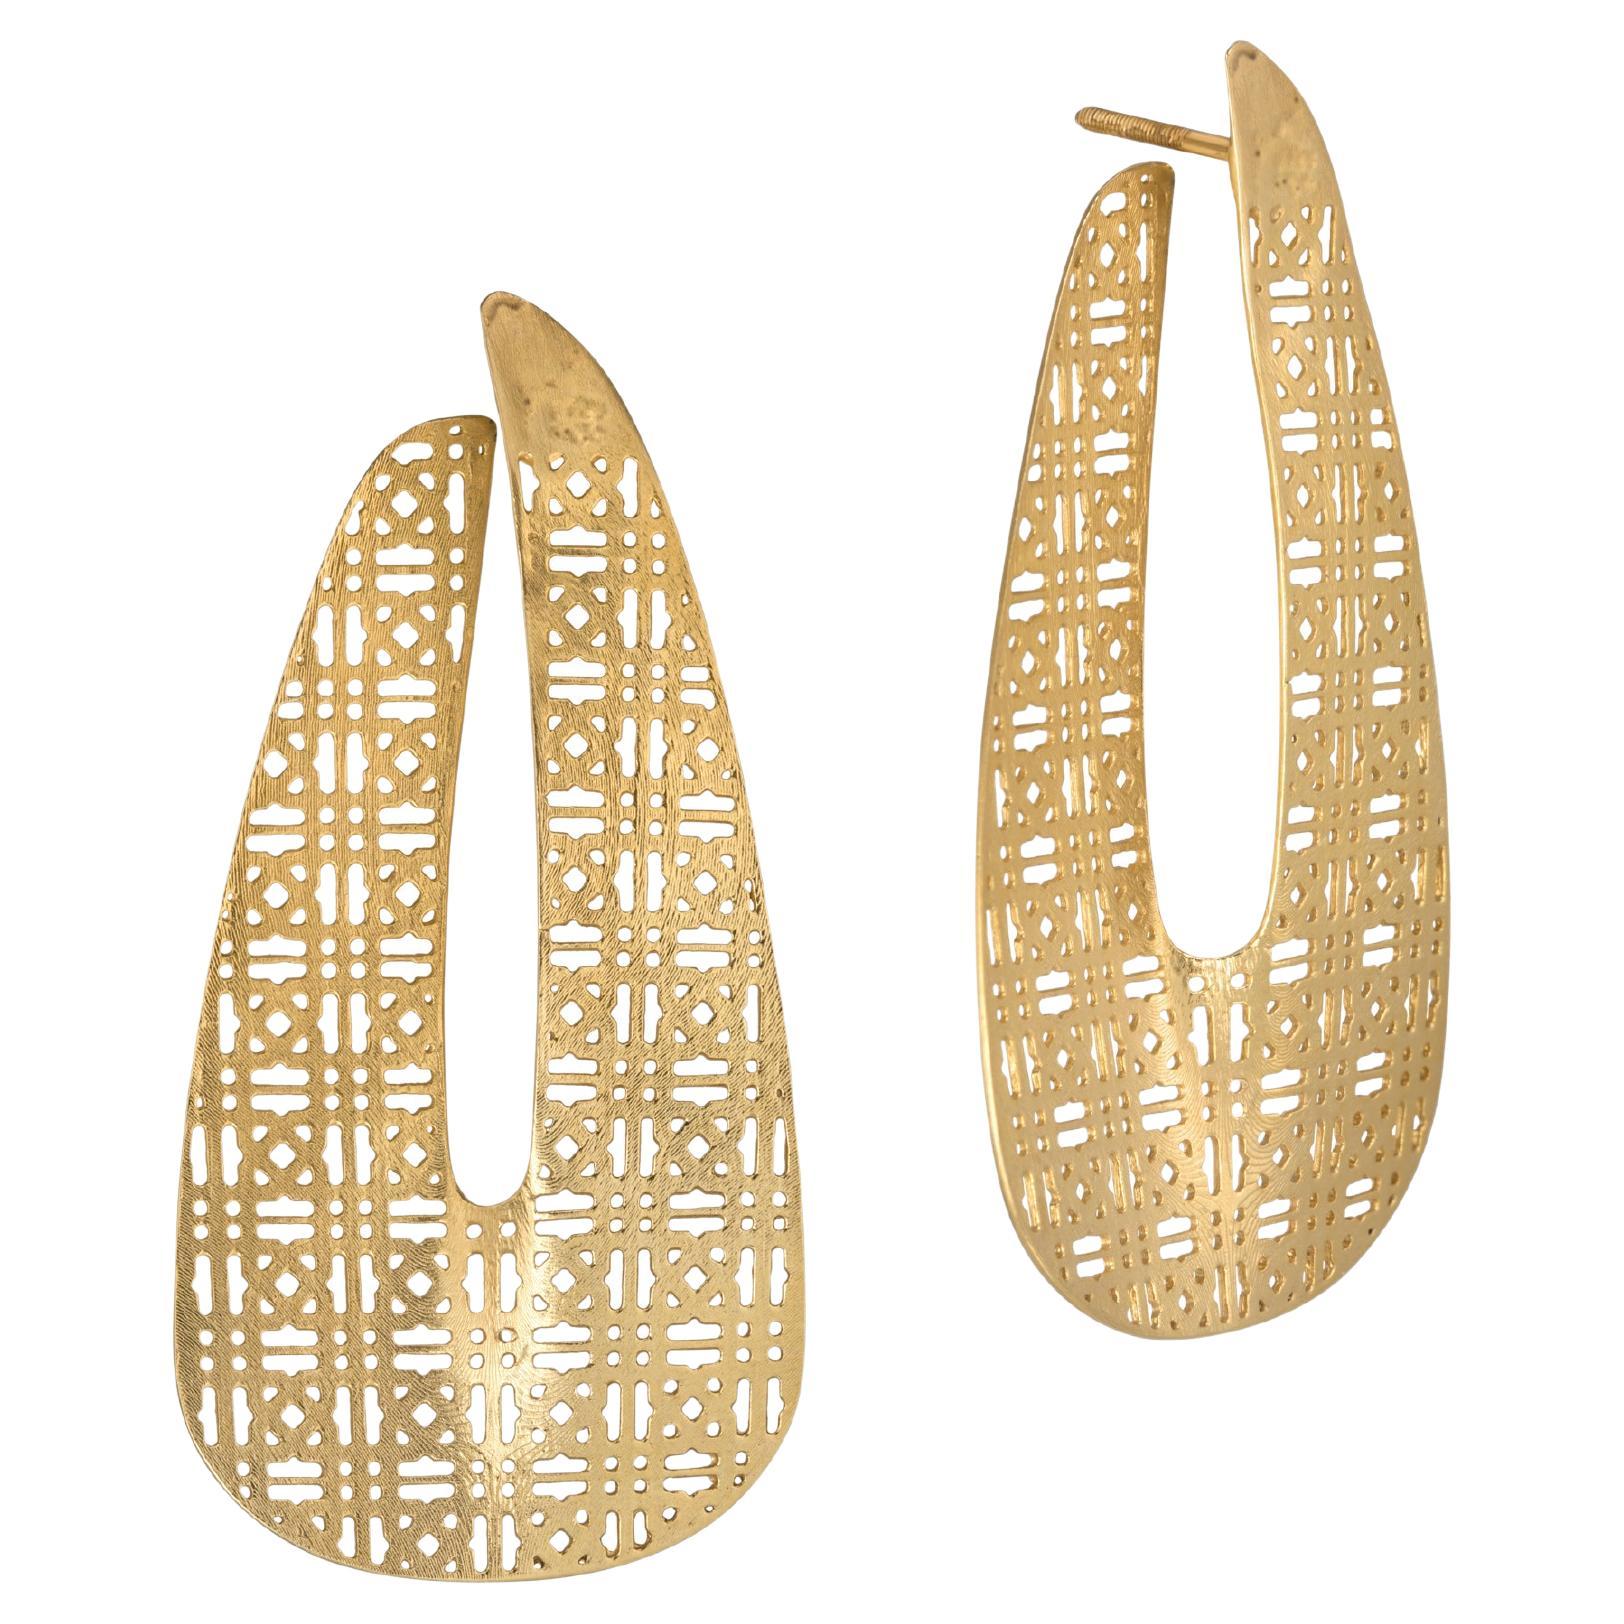 Leaf Earrings are handcrafted from 24ct gold plated bronze For Sale